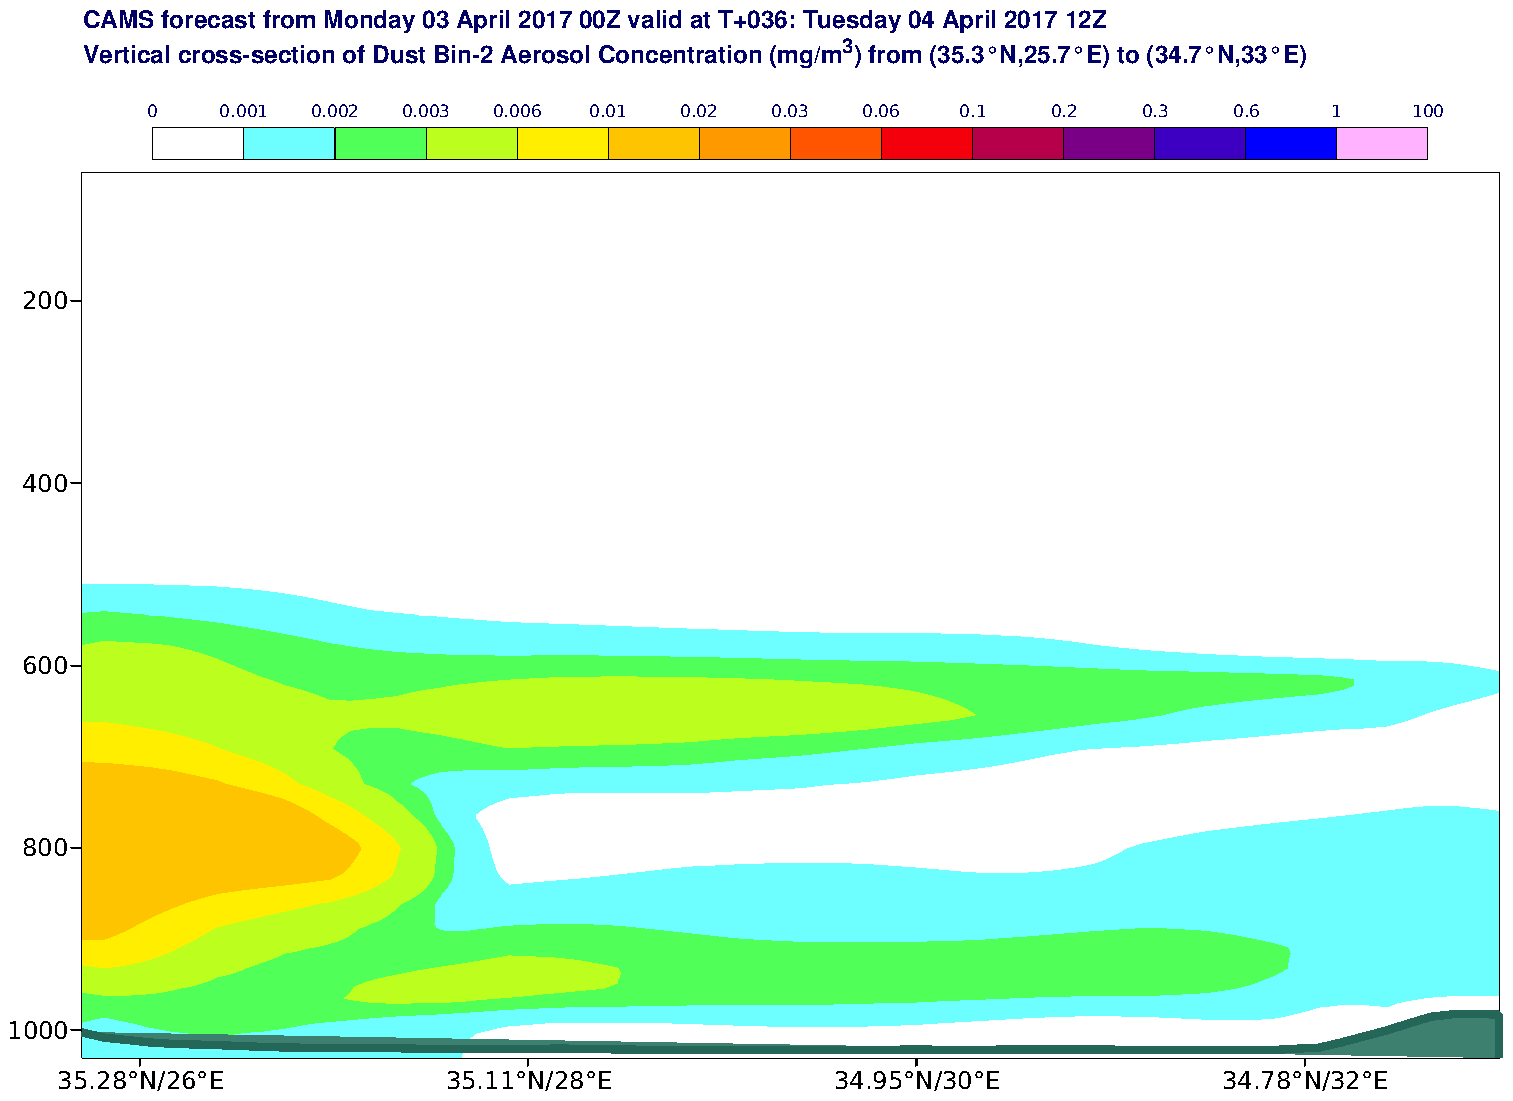 Vertical cross-section of Dust Bin-2 Aerosol Concentration (mg/m3) valid at T36 - 2017-04-04 12:00